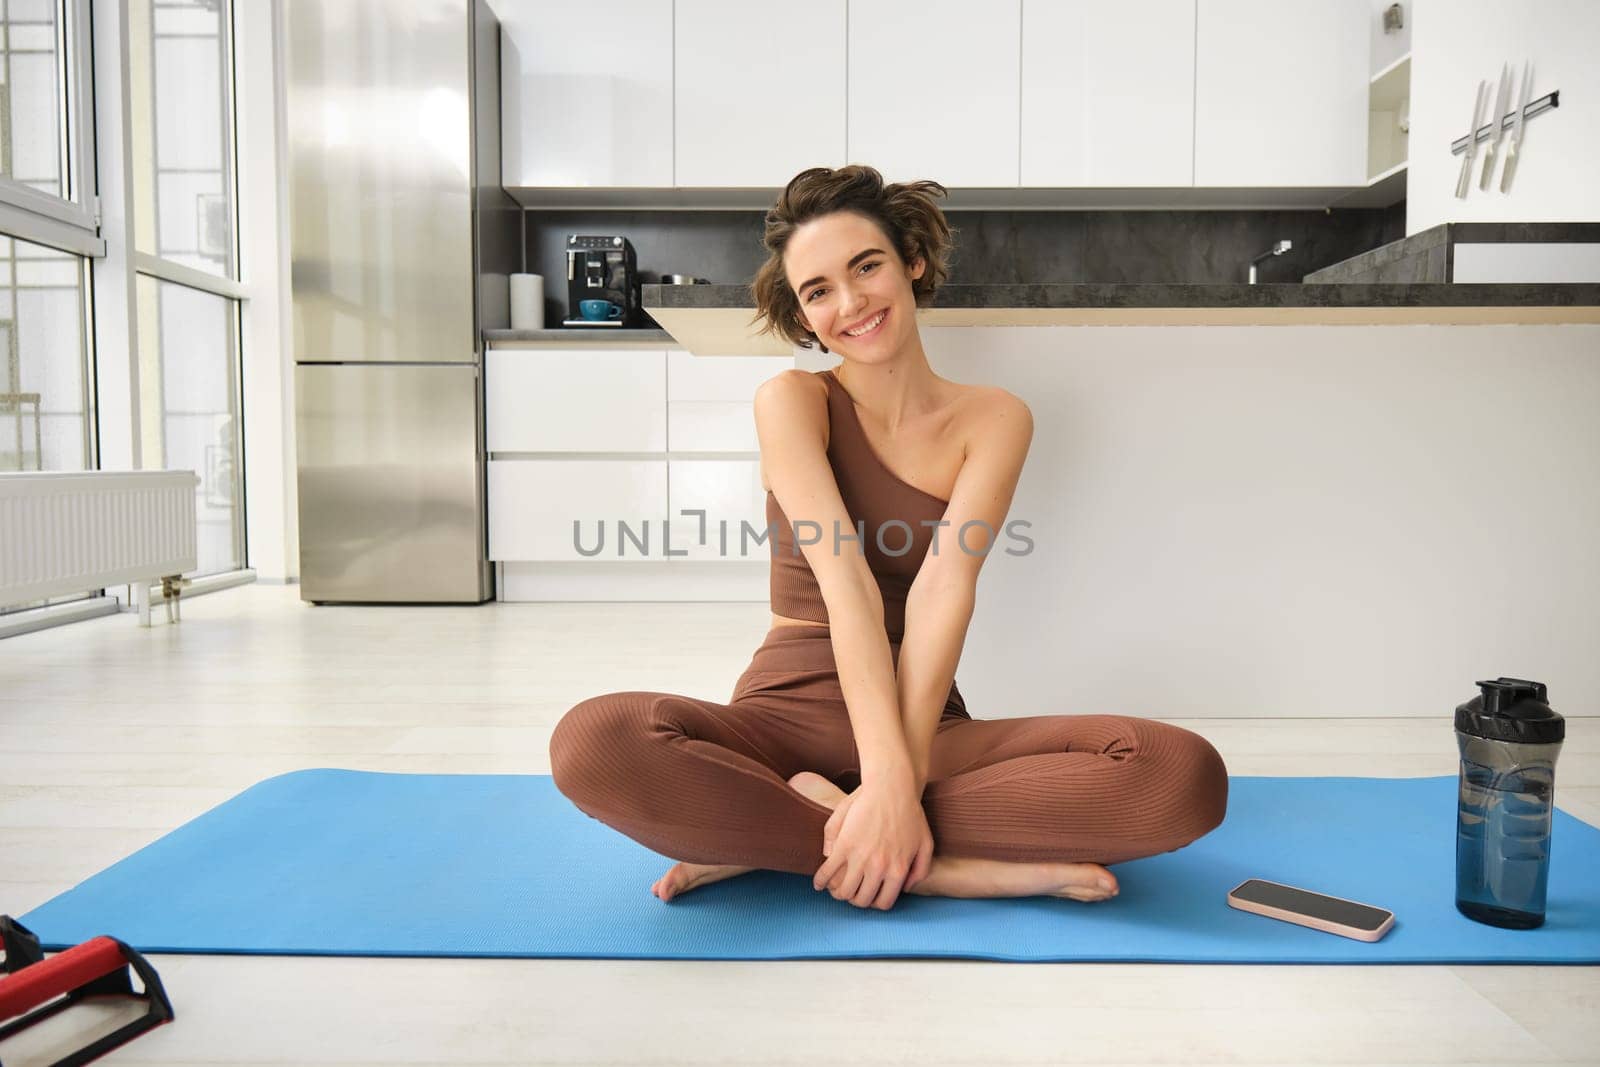 Portrait of fitness girl doing yoga on rubber mat at home, workout indoors in kitchen wearing sportswear, practice minfulness, sitting in lotus pose with water bottle next to her.